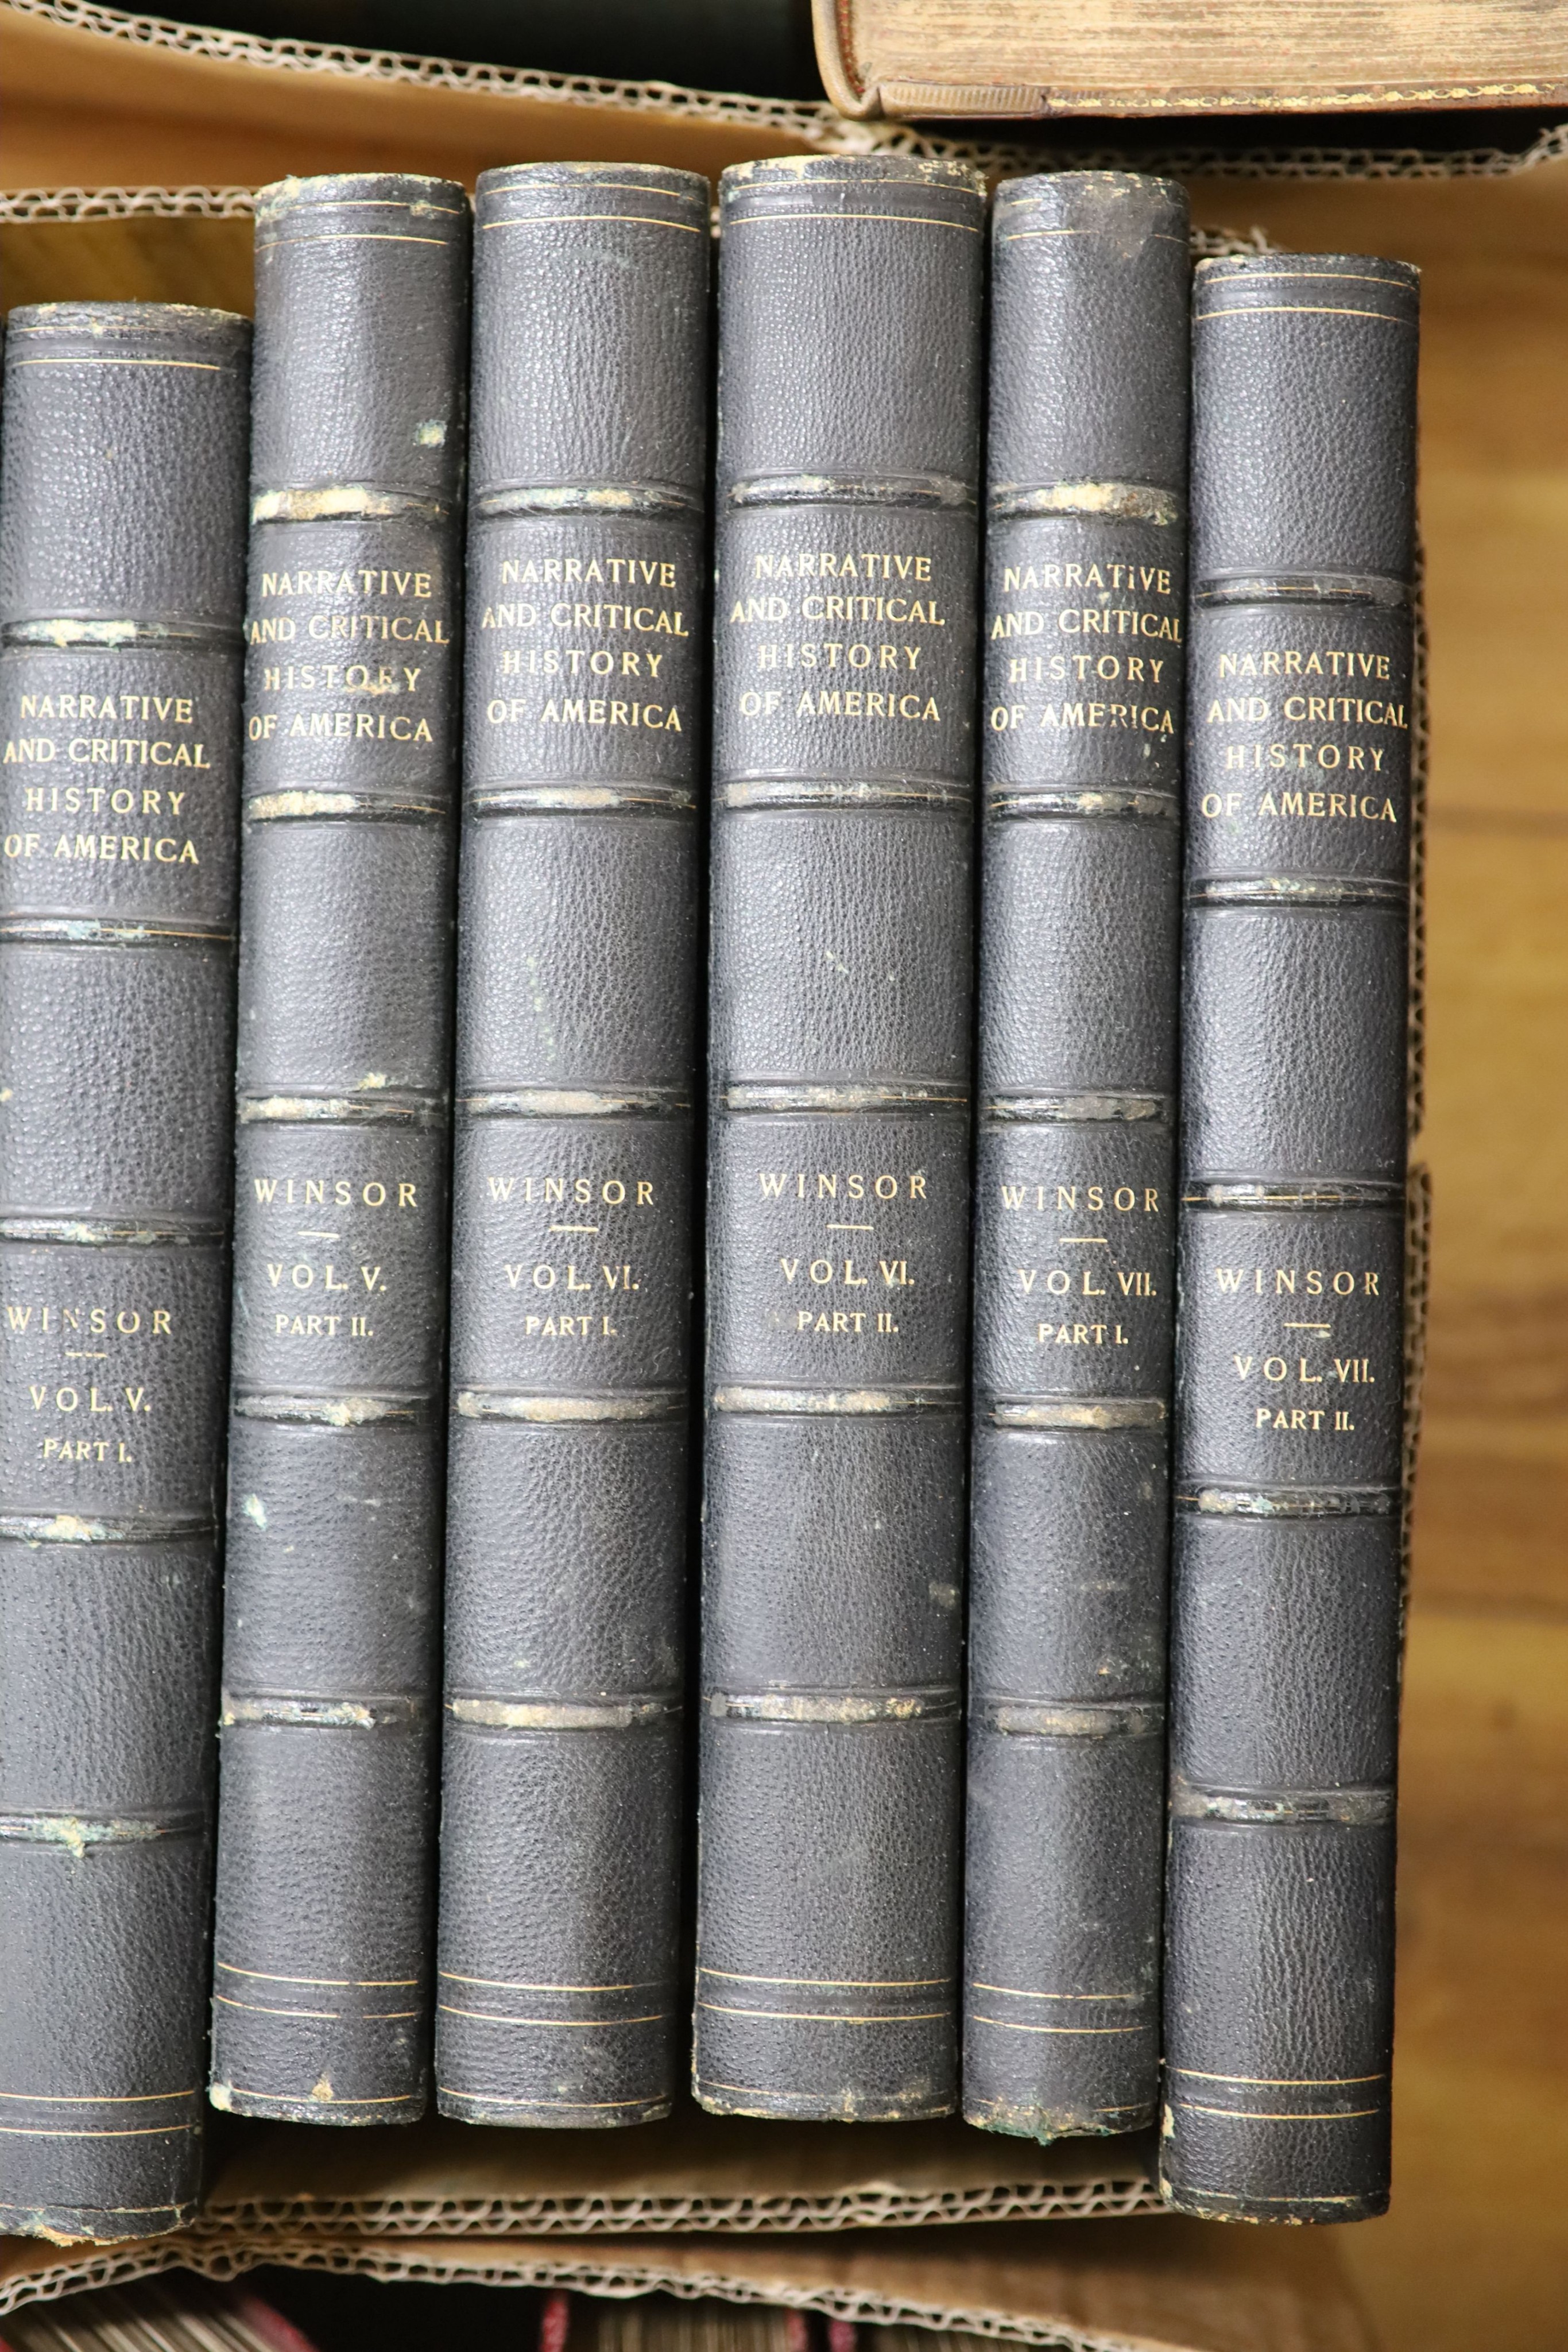 Winsor, Justin - Narrative and Critical History of America. 1st edition, 8 vols in 16. Complete with at least 19 illustrated plates, 2 of which are in colour, plus numerous text illustrations (many full or double page).